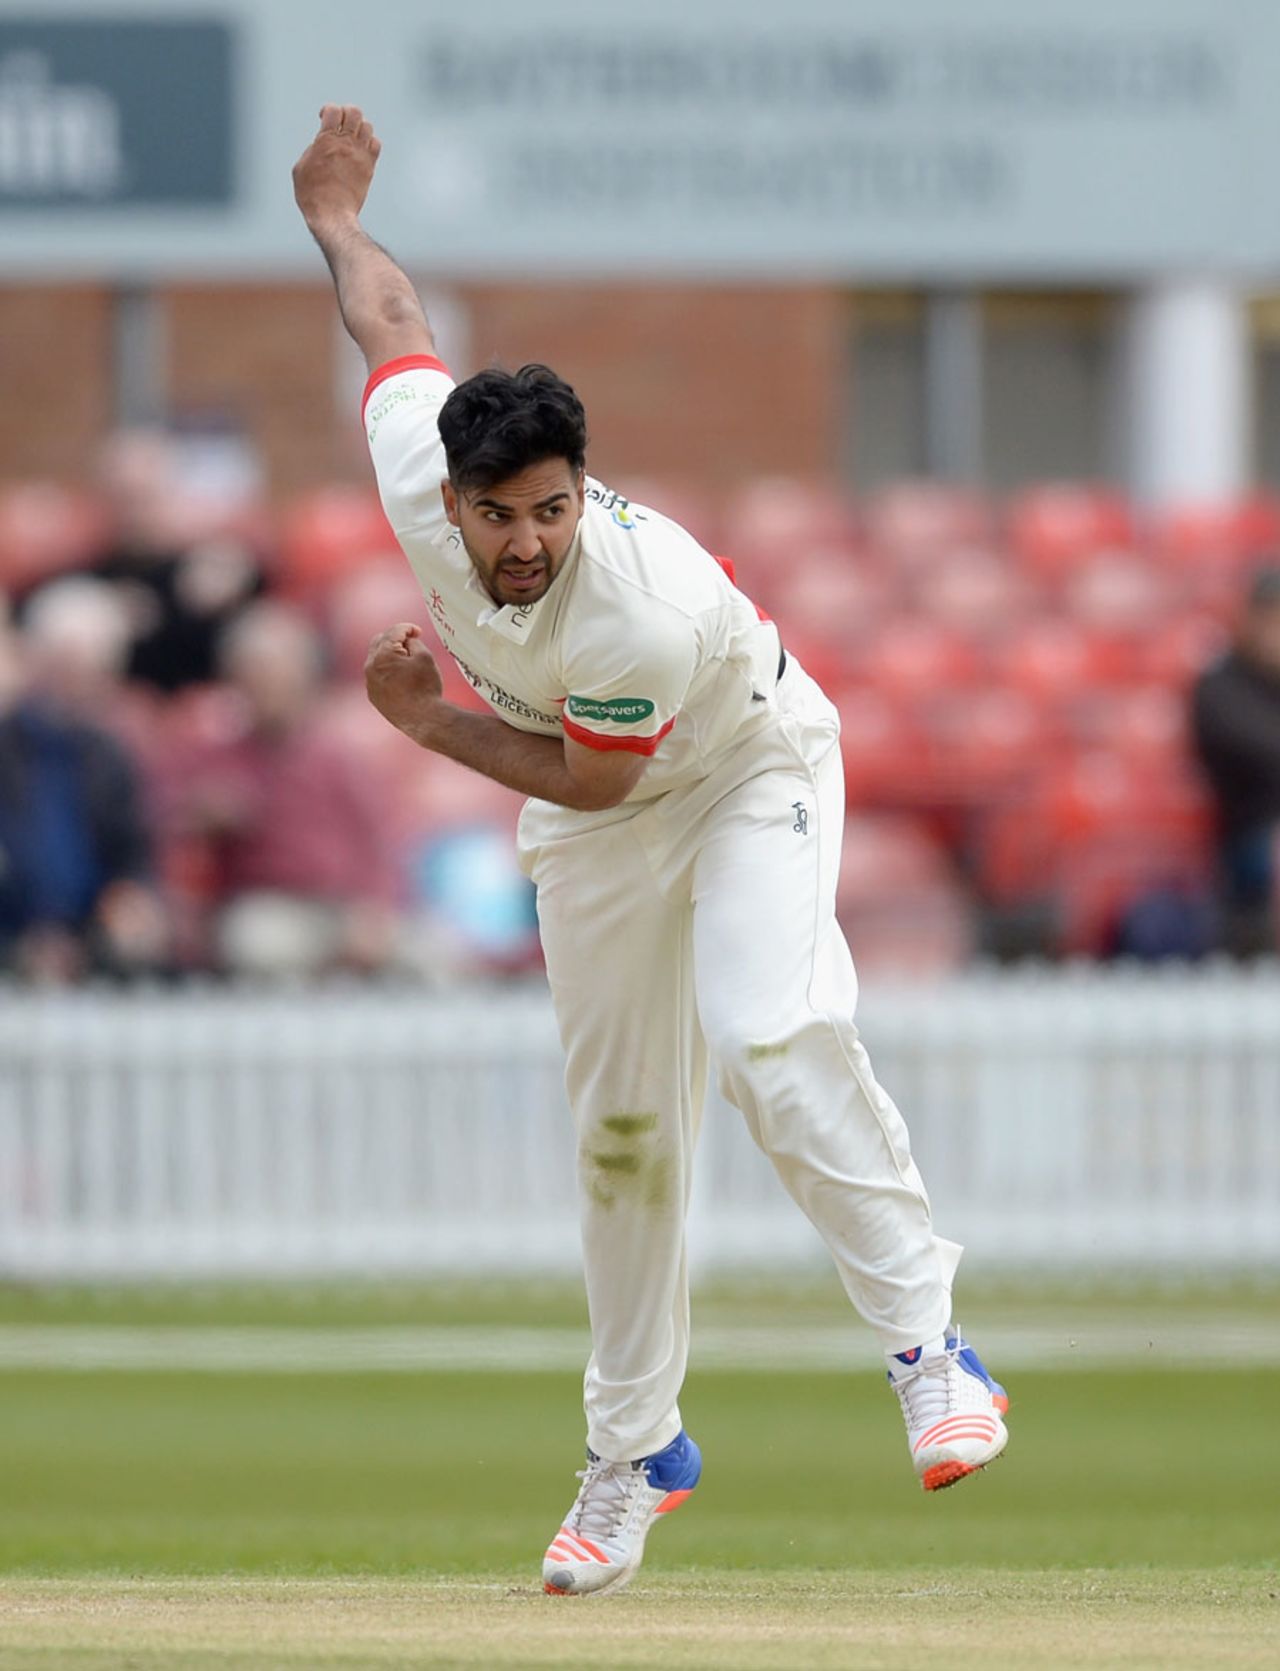 Atif Sheikh bowled quickly but only picked up 1 for 86, Leicestershire v Sri Lankans, Tour match, Grace Road, 2nd day, May 14, 2016